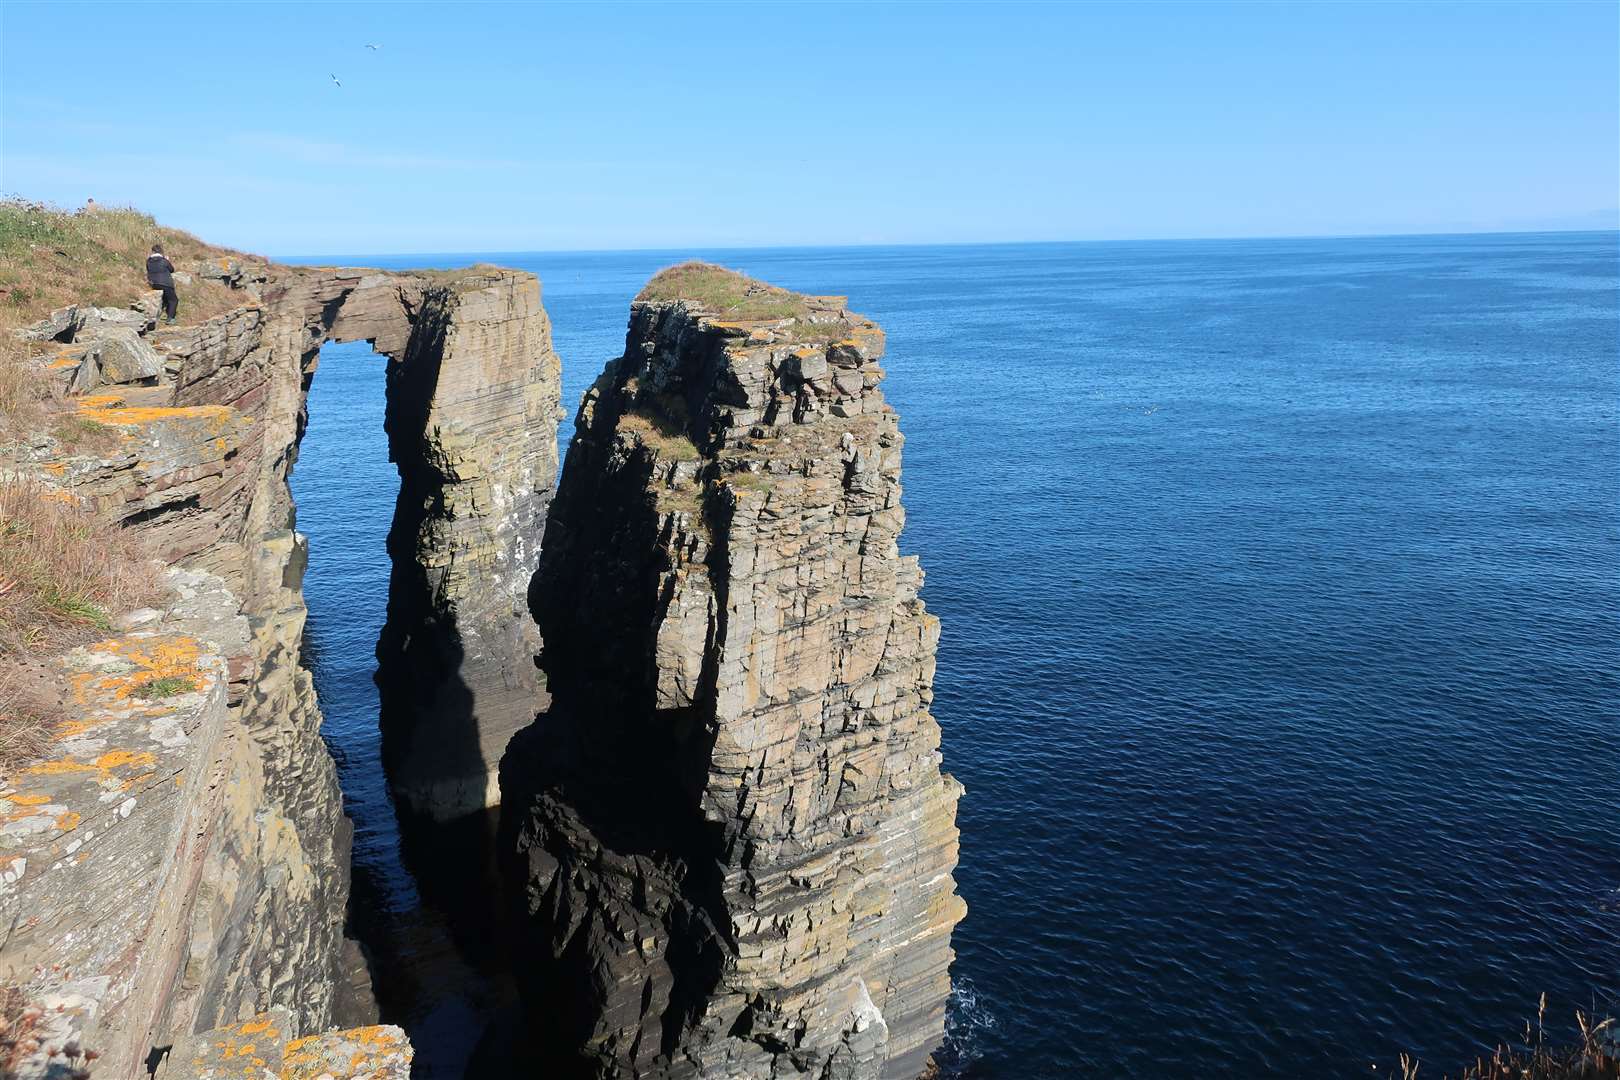 A dramatic arch and sea stack passed on the way south beyond the castle.